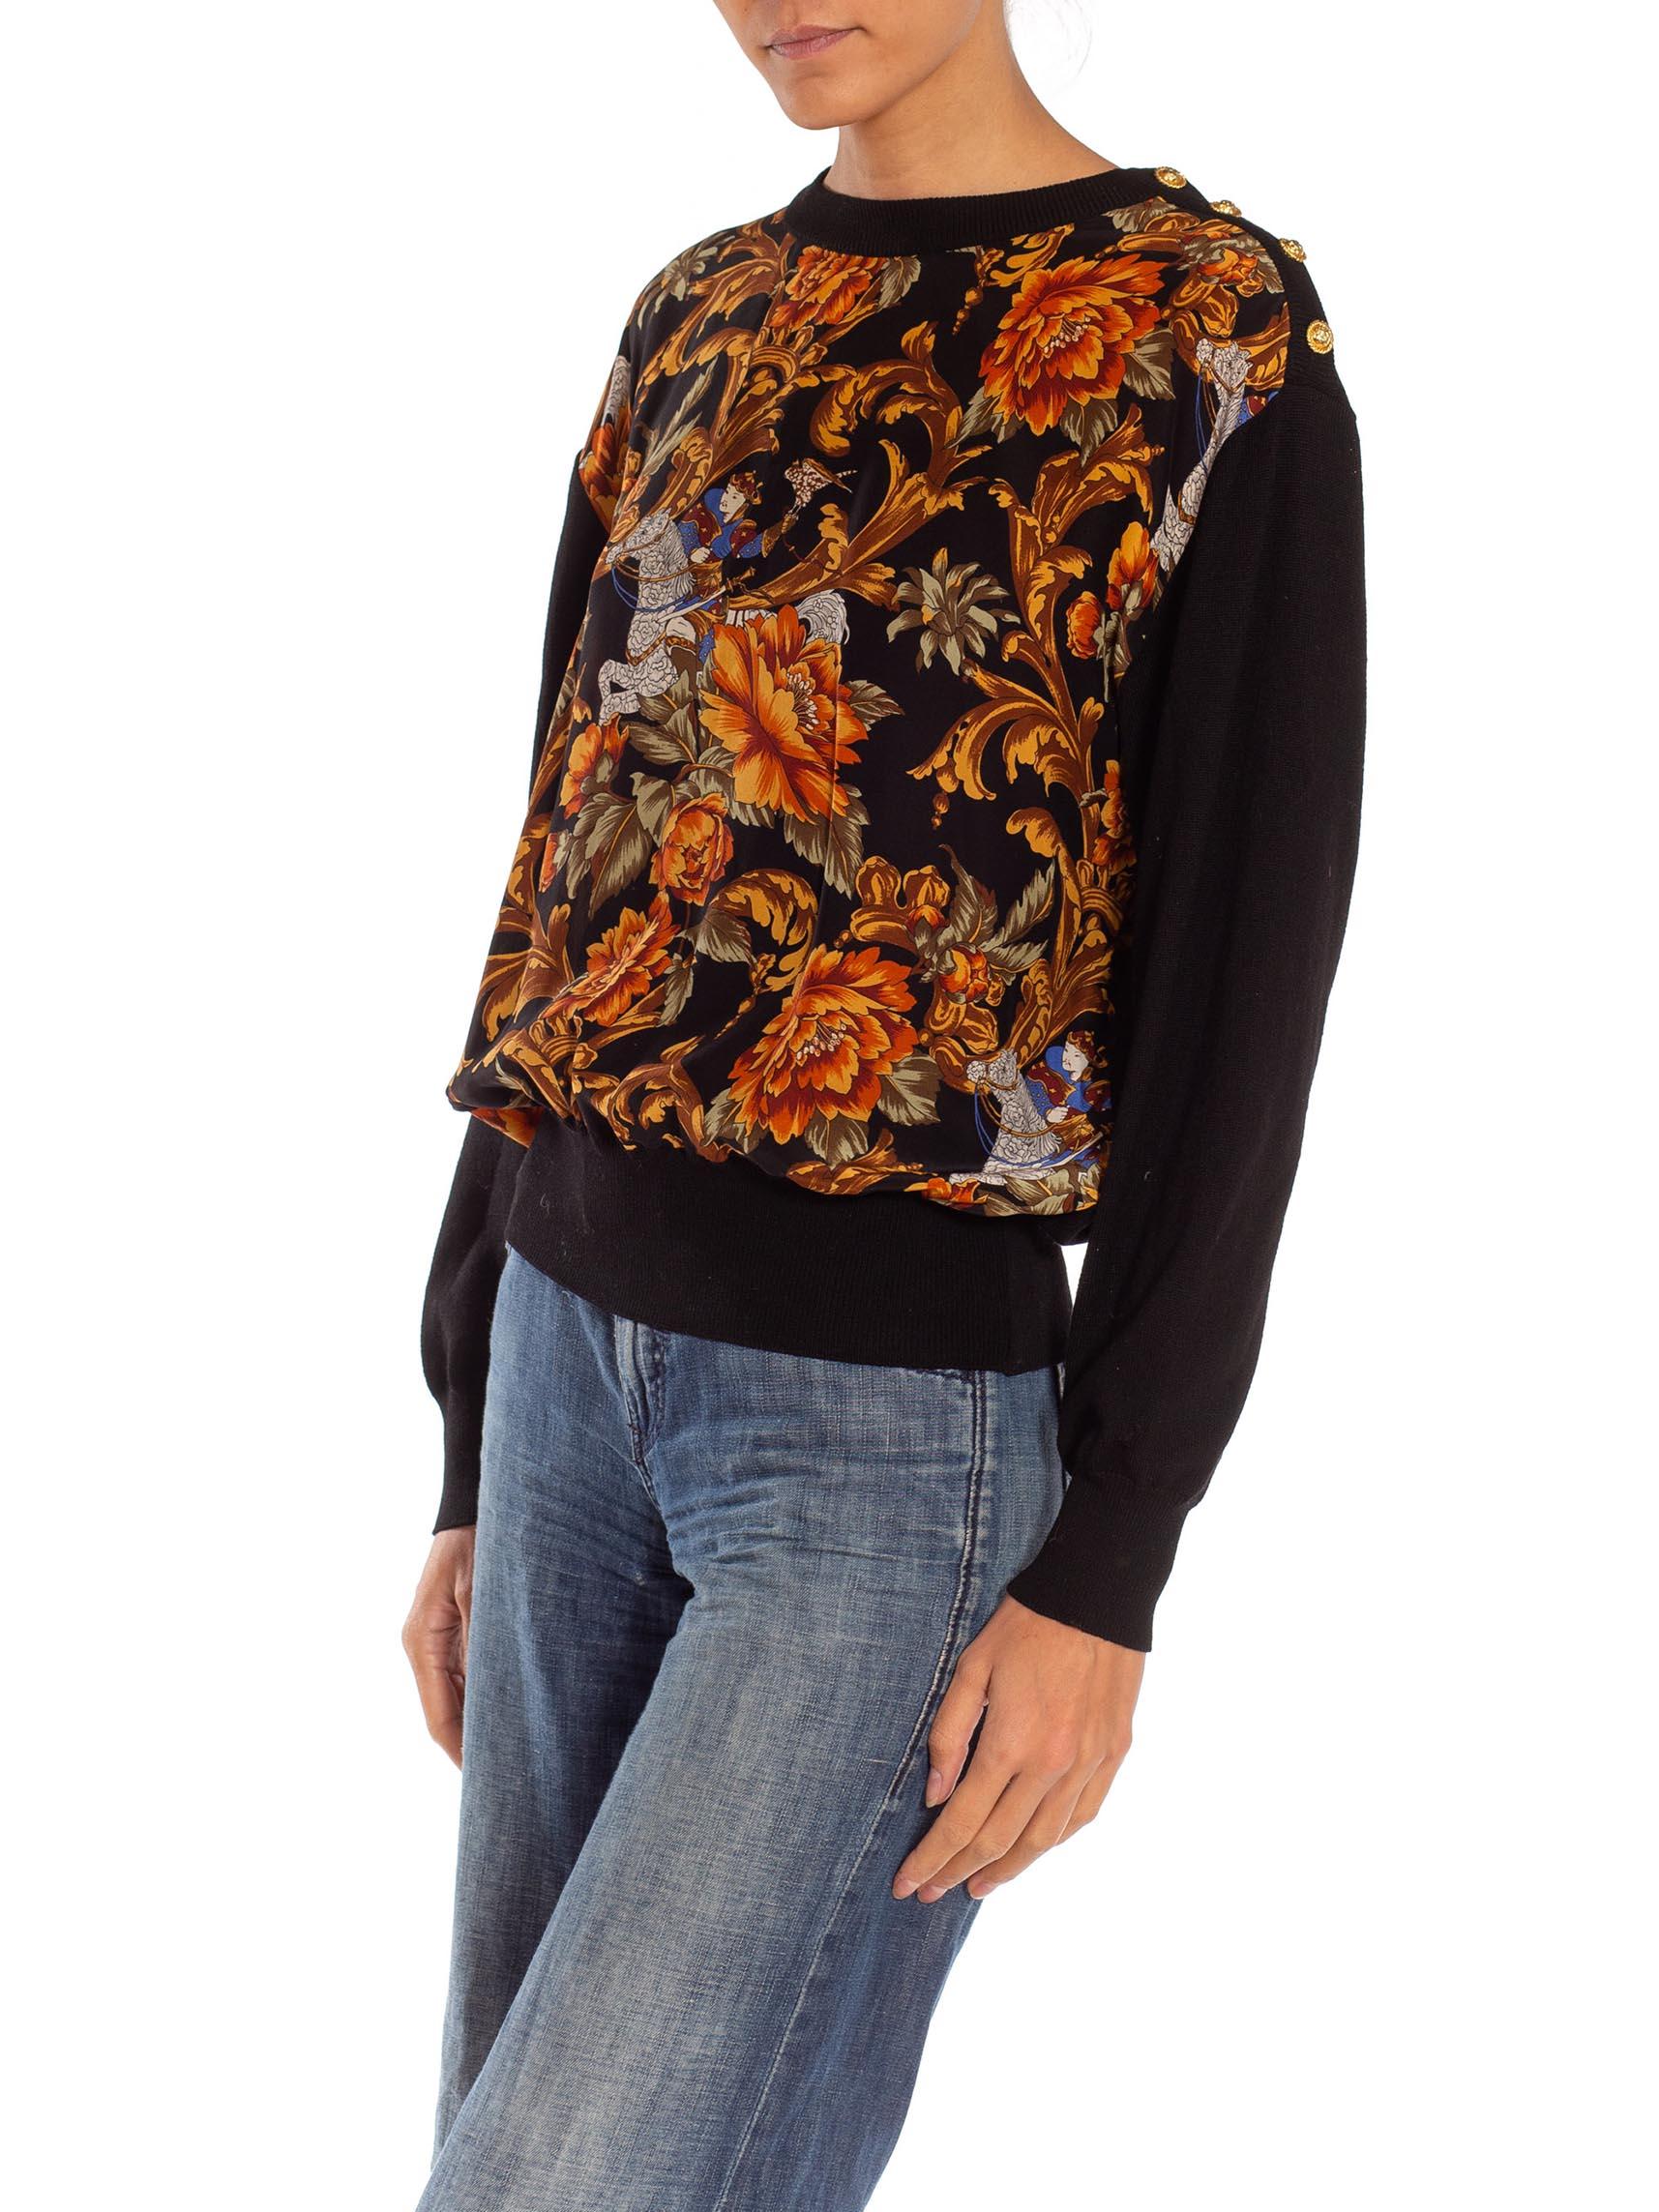 1990S SALVATORE FERRAGAMO Black & Gold Silk Knit Baroque Printed Sweater In Excellent Condition For Sale In New York, NY